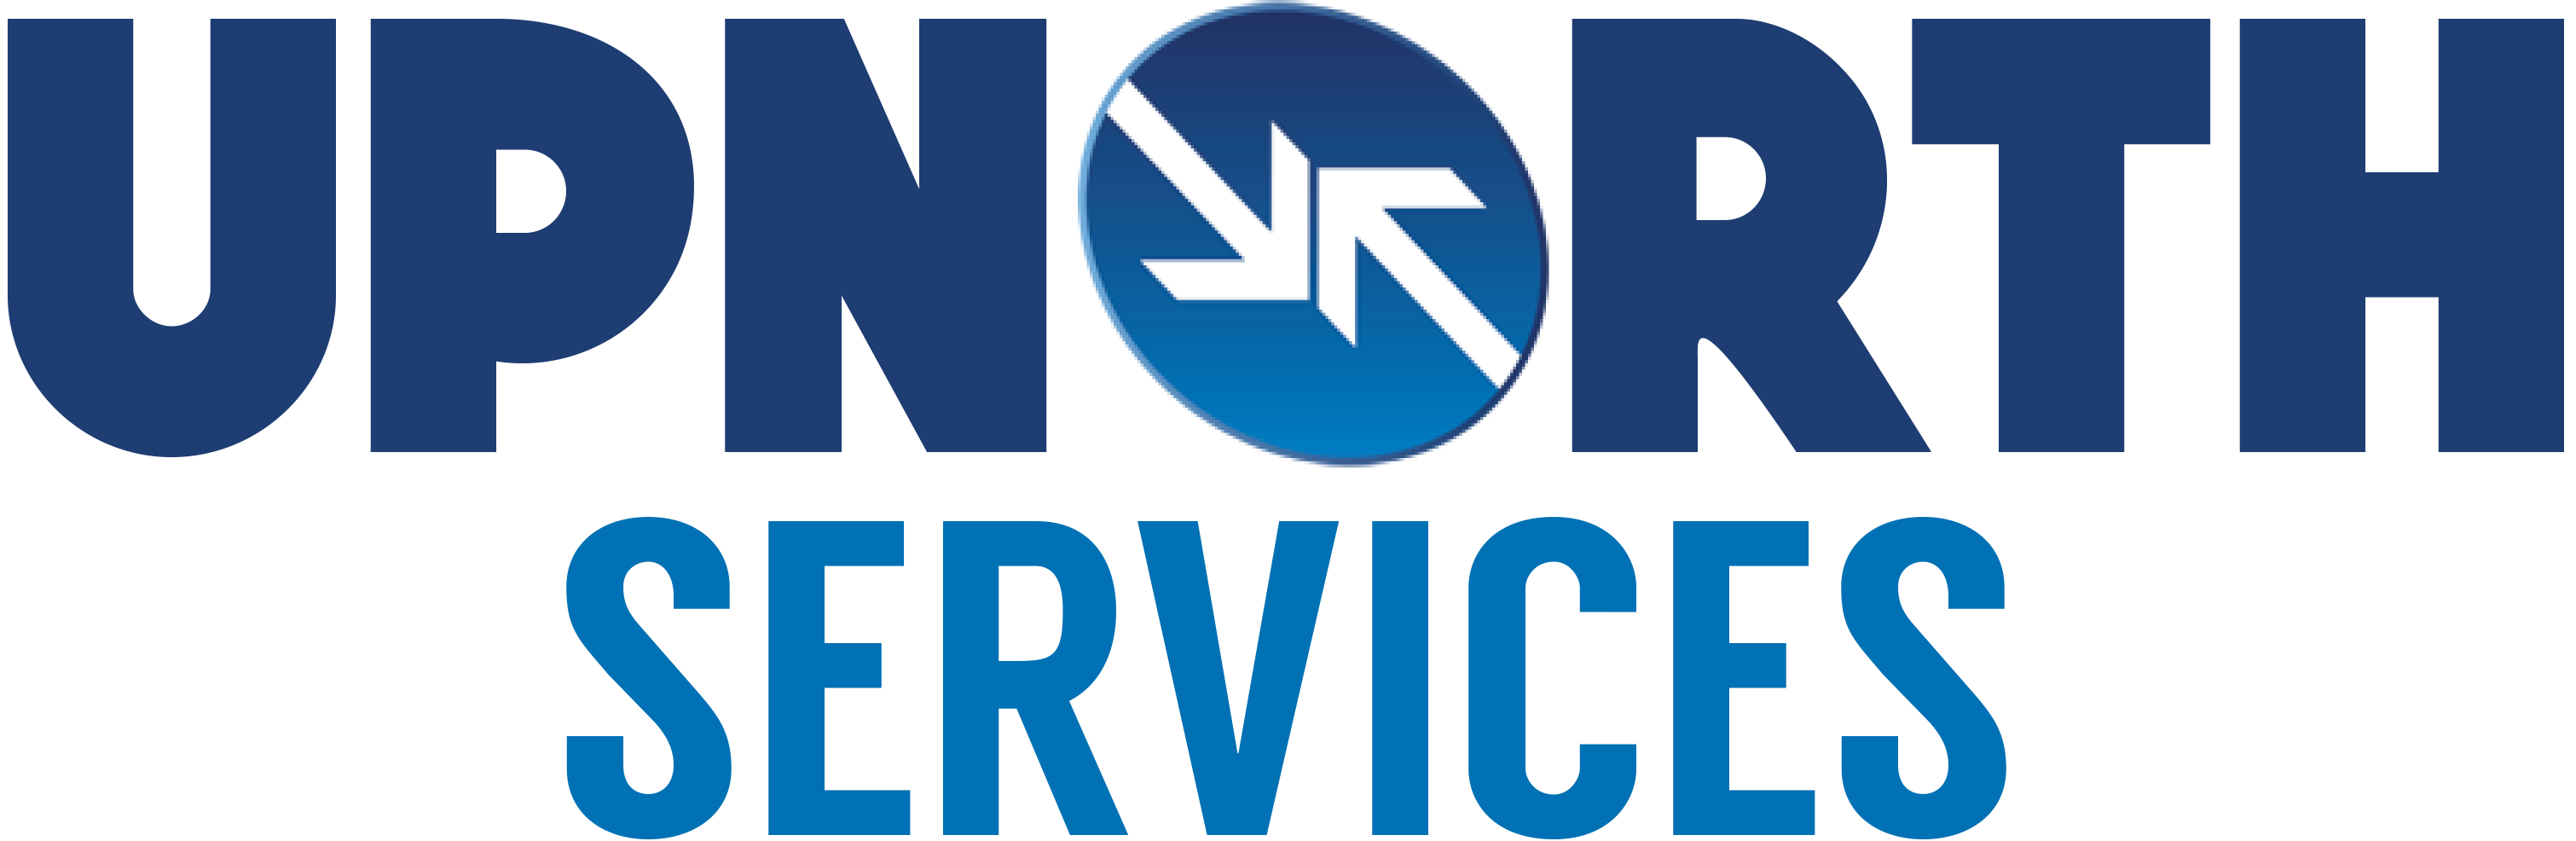 UpNorth Services